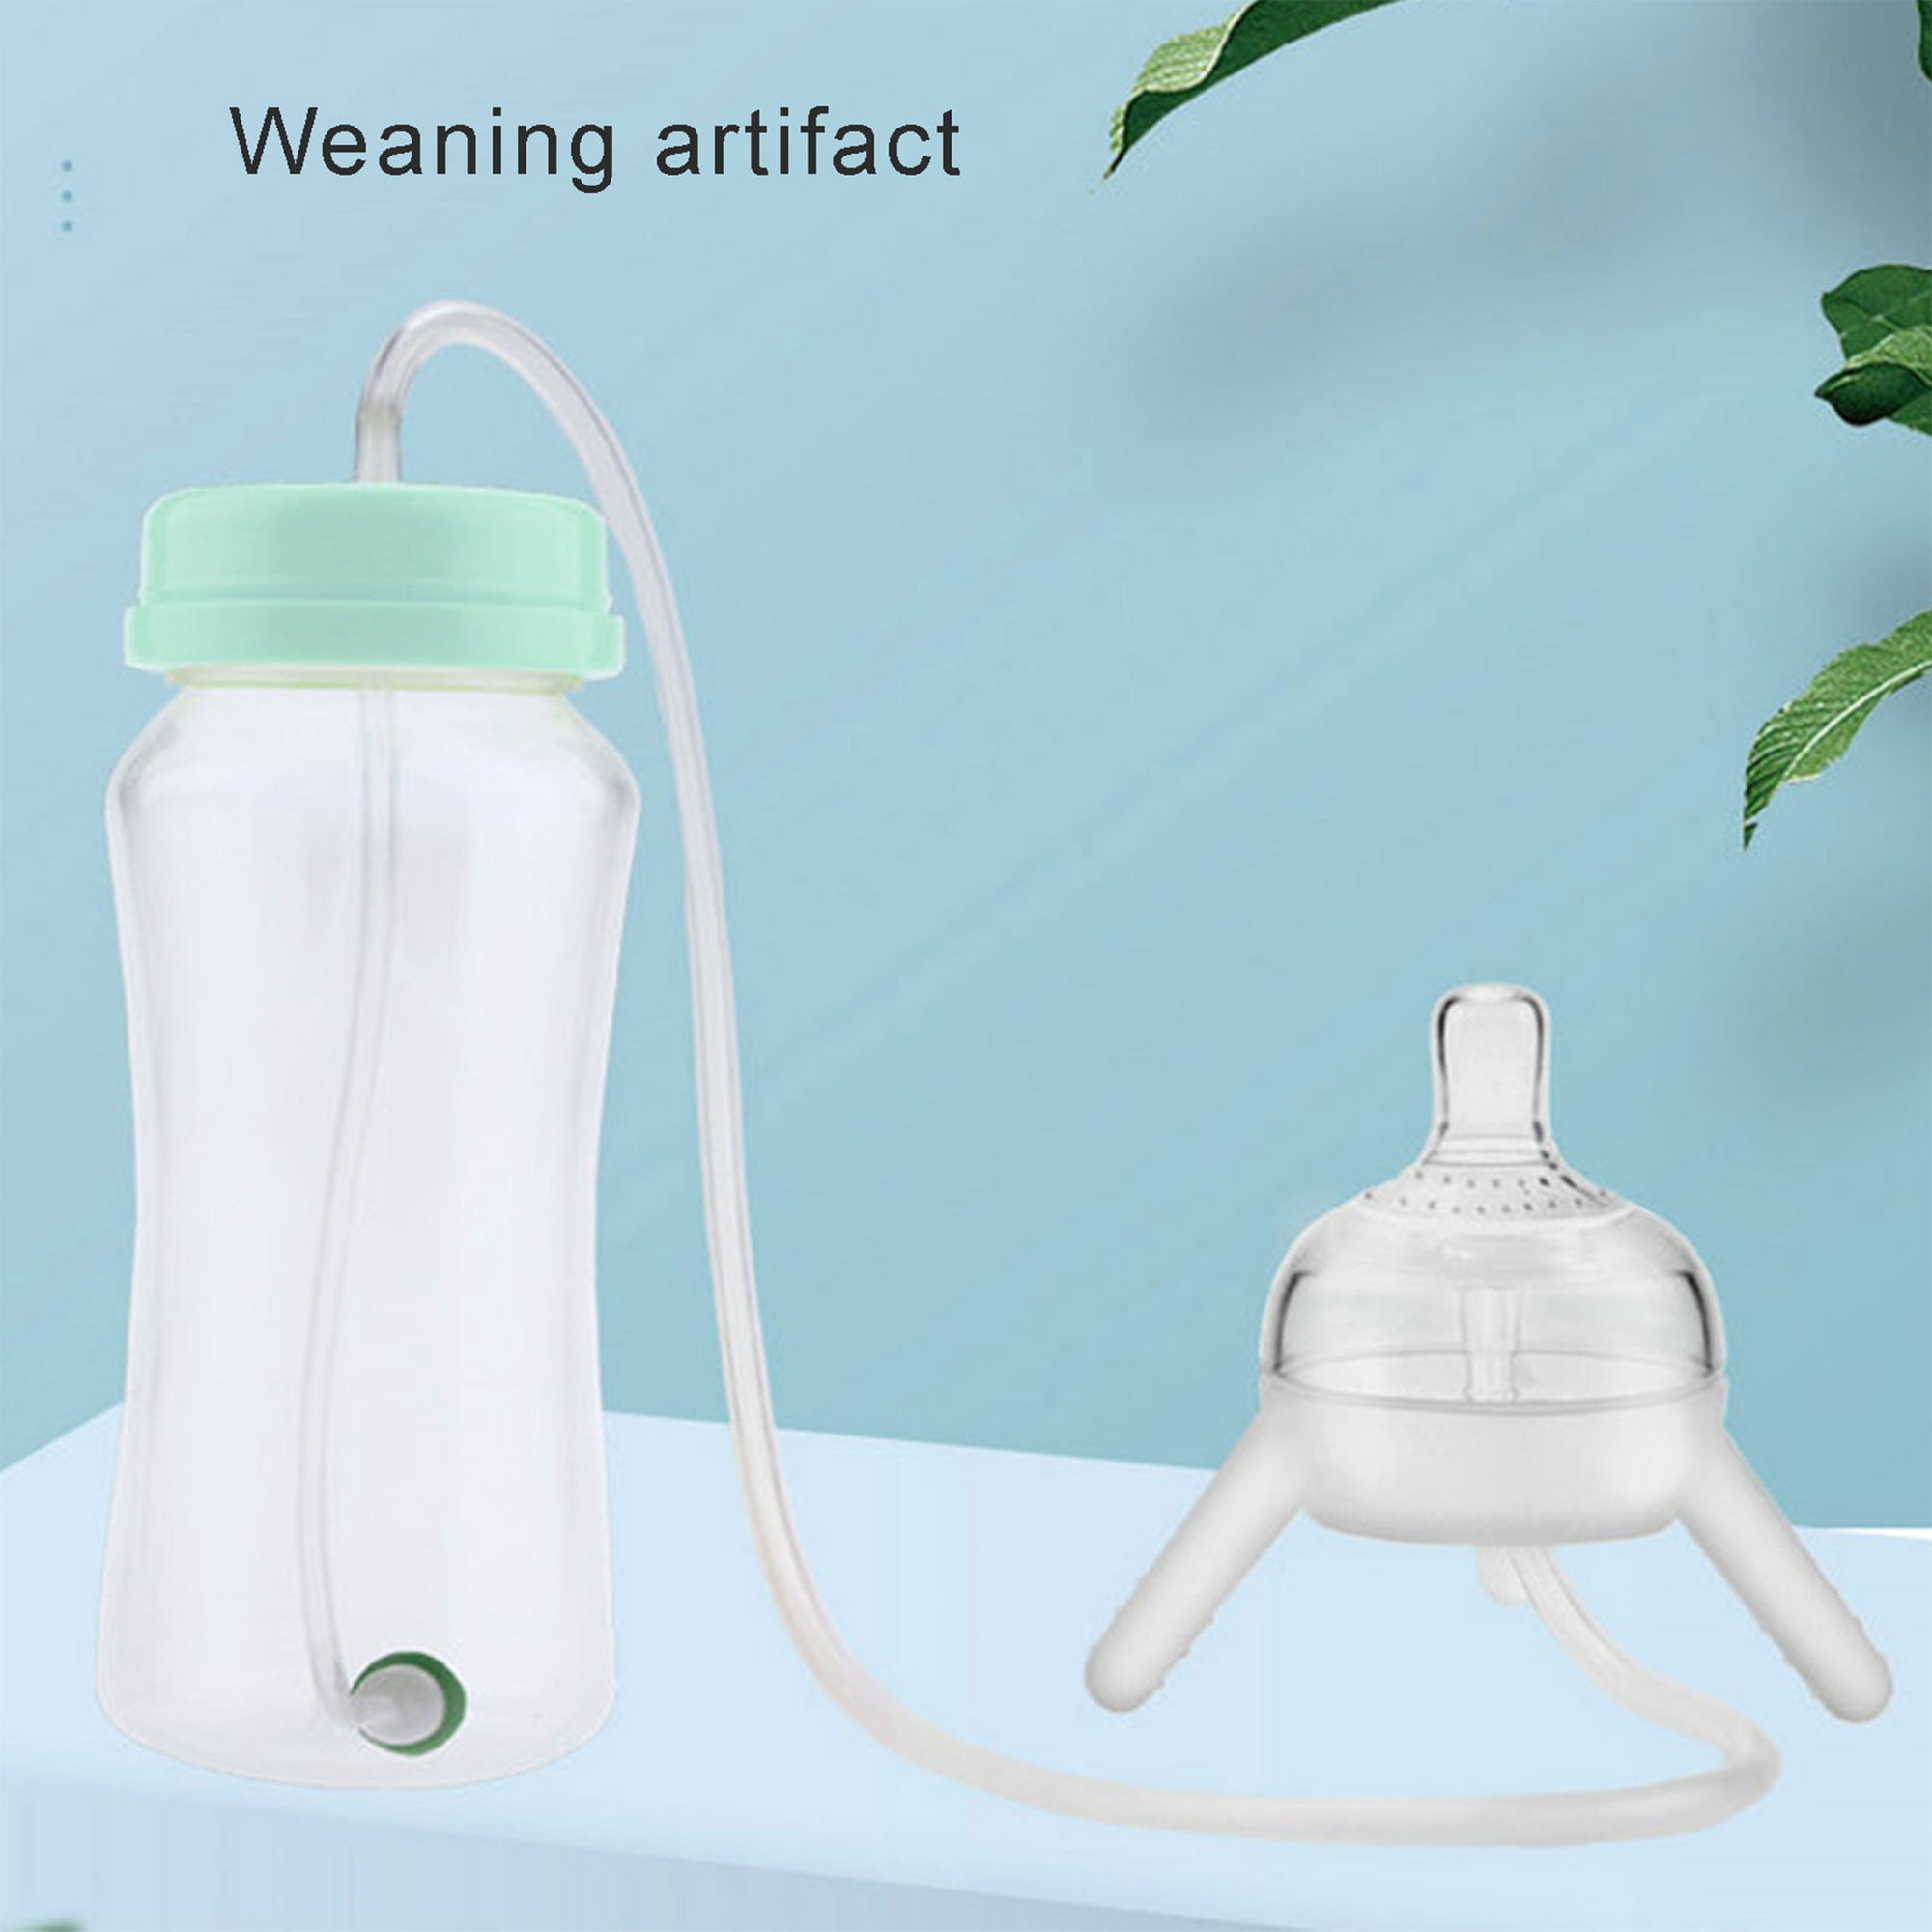 300ml Baby Bottle Thermos Stainless Steel Feeding Bottle 2-in-1